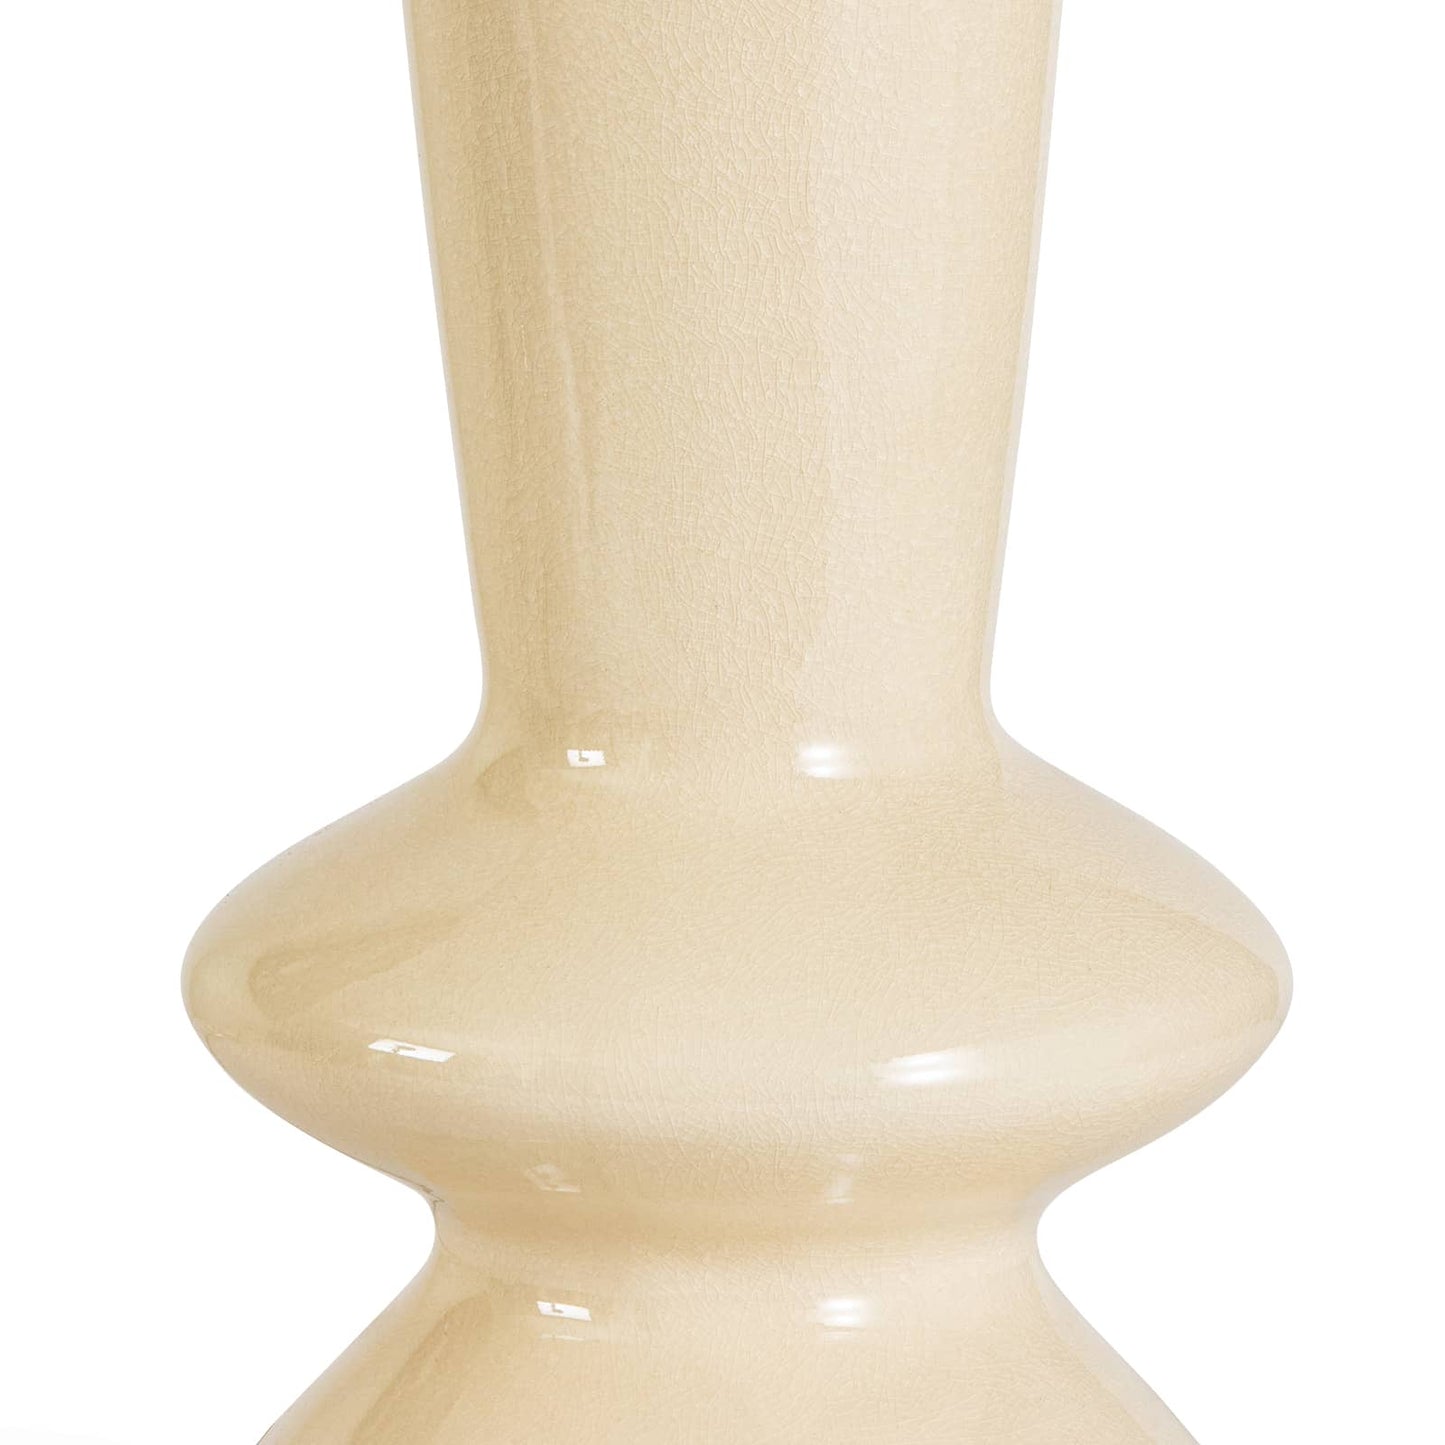 Pennie Ceramic Table Lamp in Ivory by Southern Living